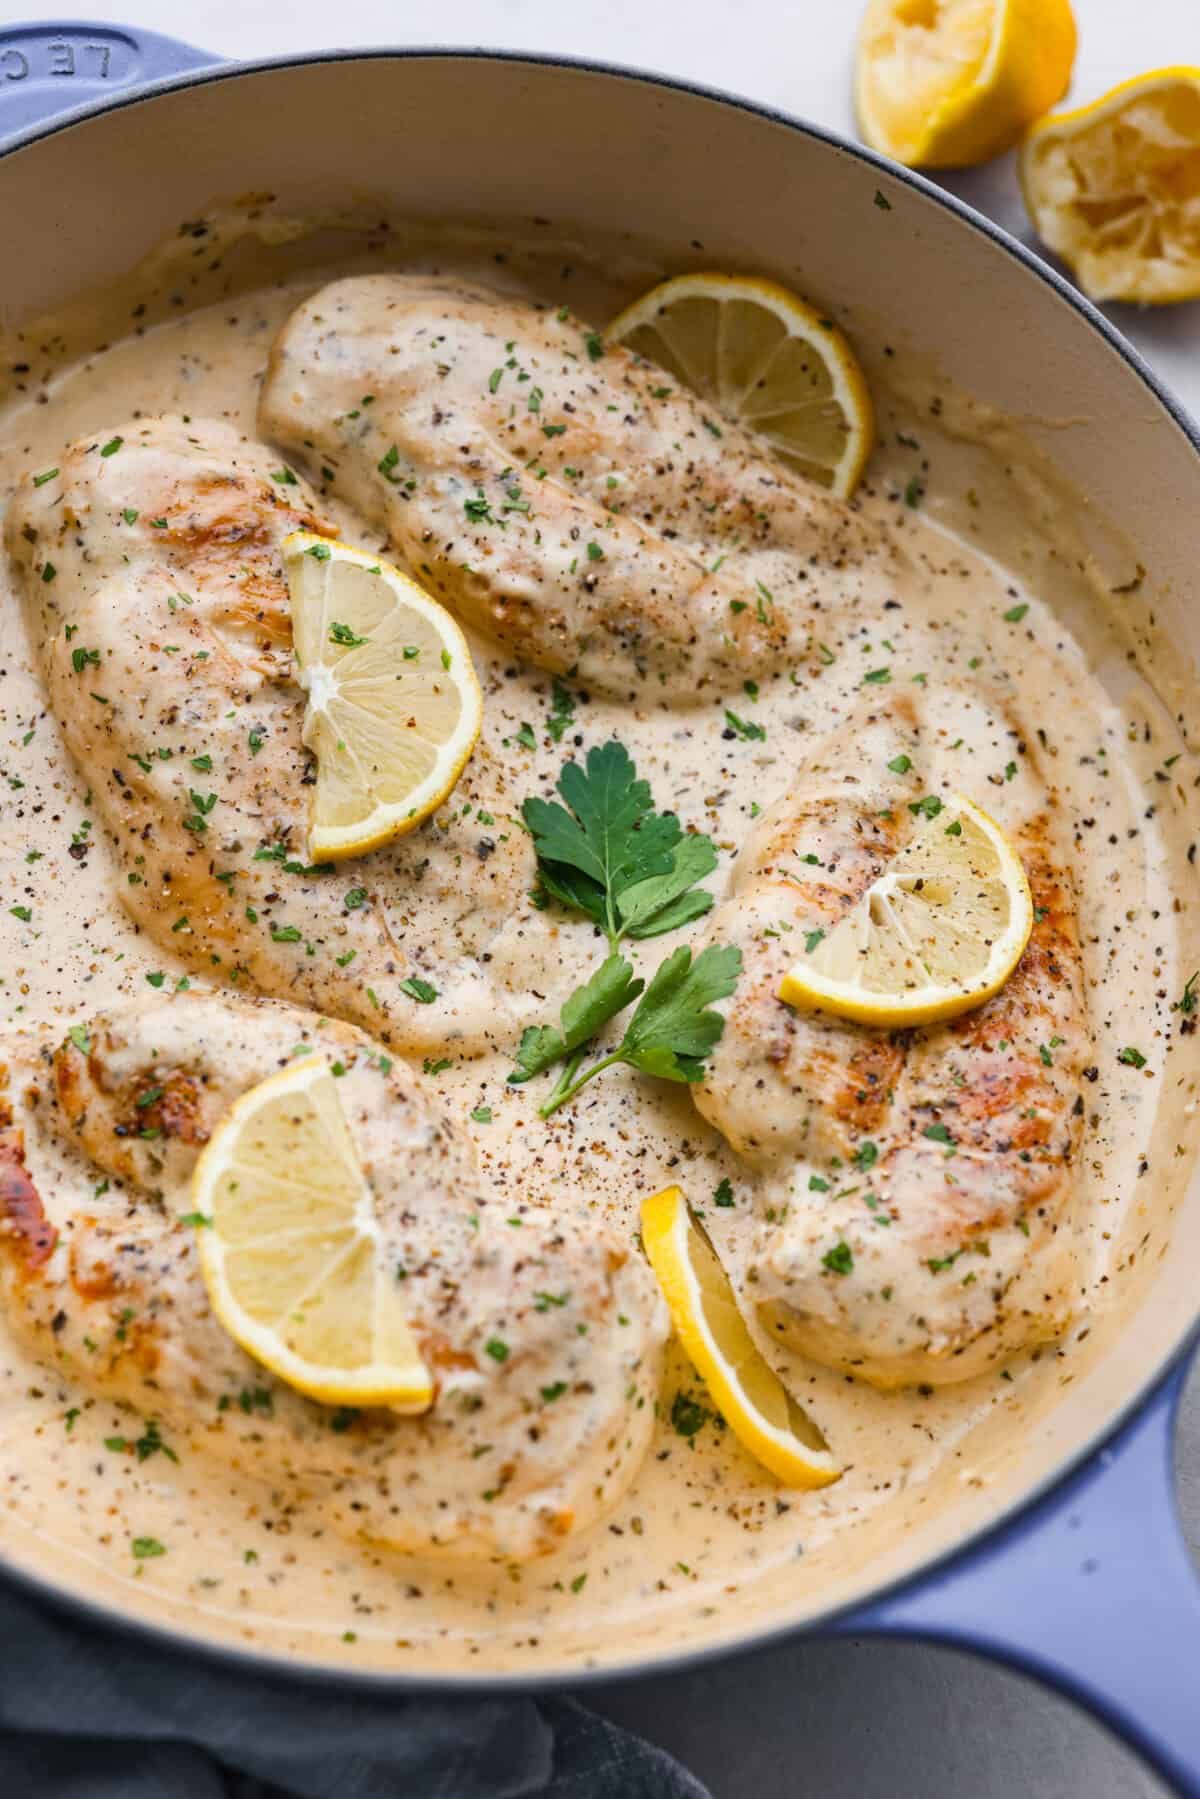 The finished creamy lemon parmesan chicken in a blue and white skillet, garnished with lemon slices.